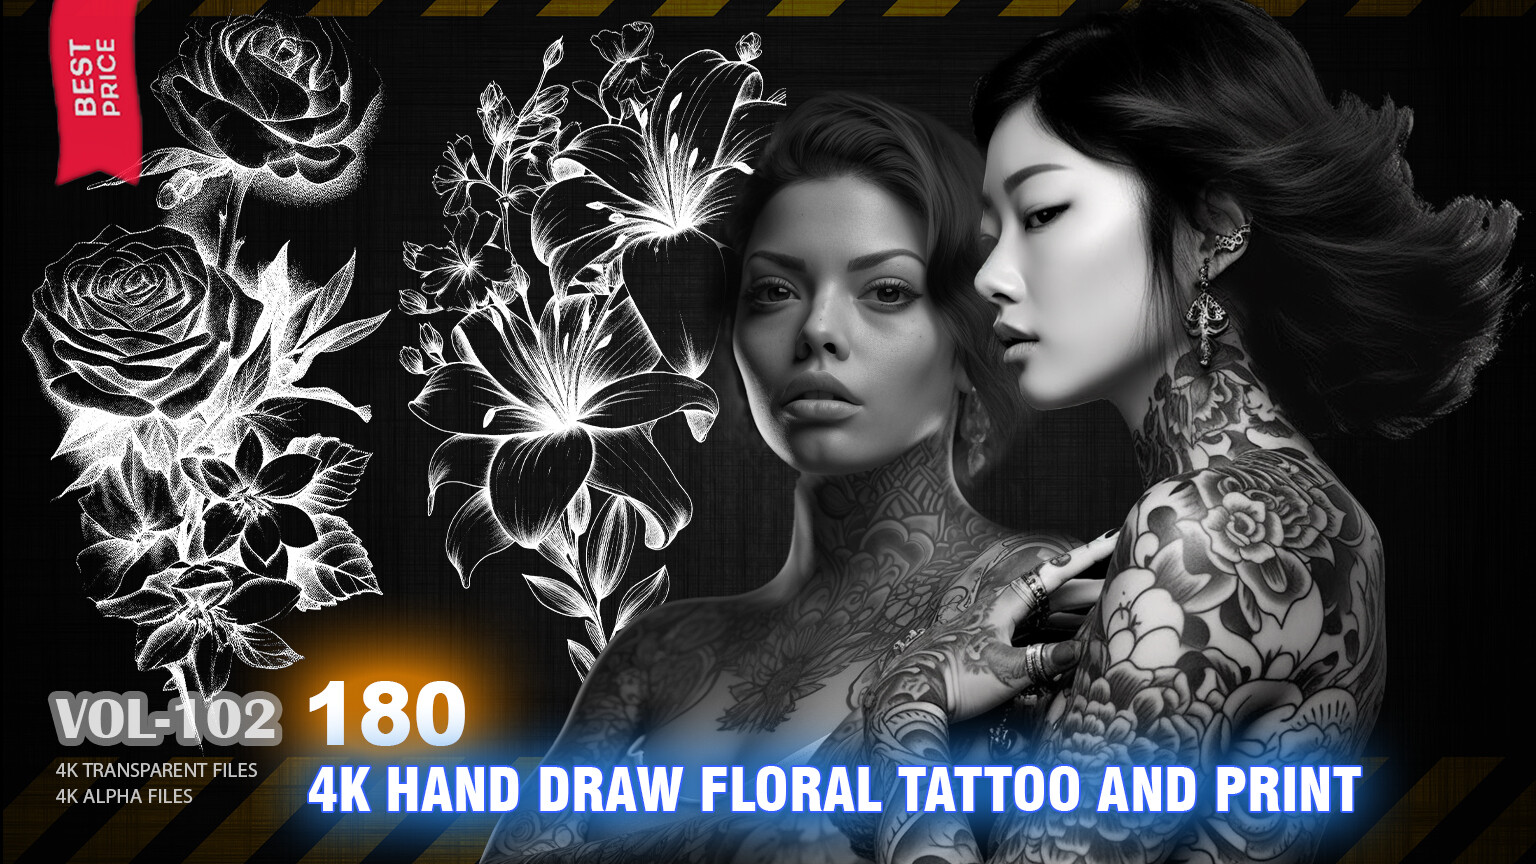 180 4K HAND DRAW FLORAL TATTOO AND PRINT - HIGH END QUALITY RES - (ALPHA & TRANSPARENT) - VOL102